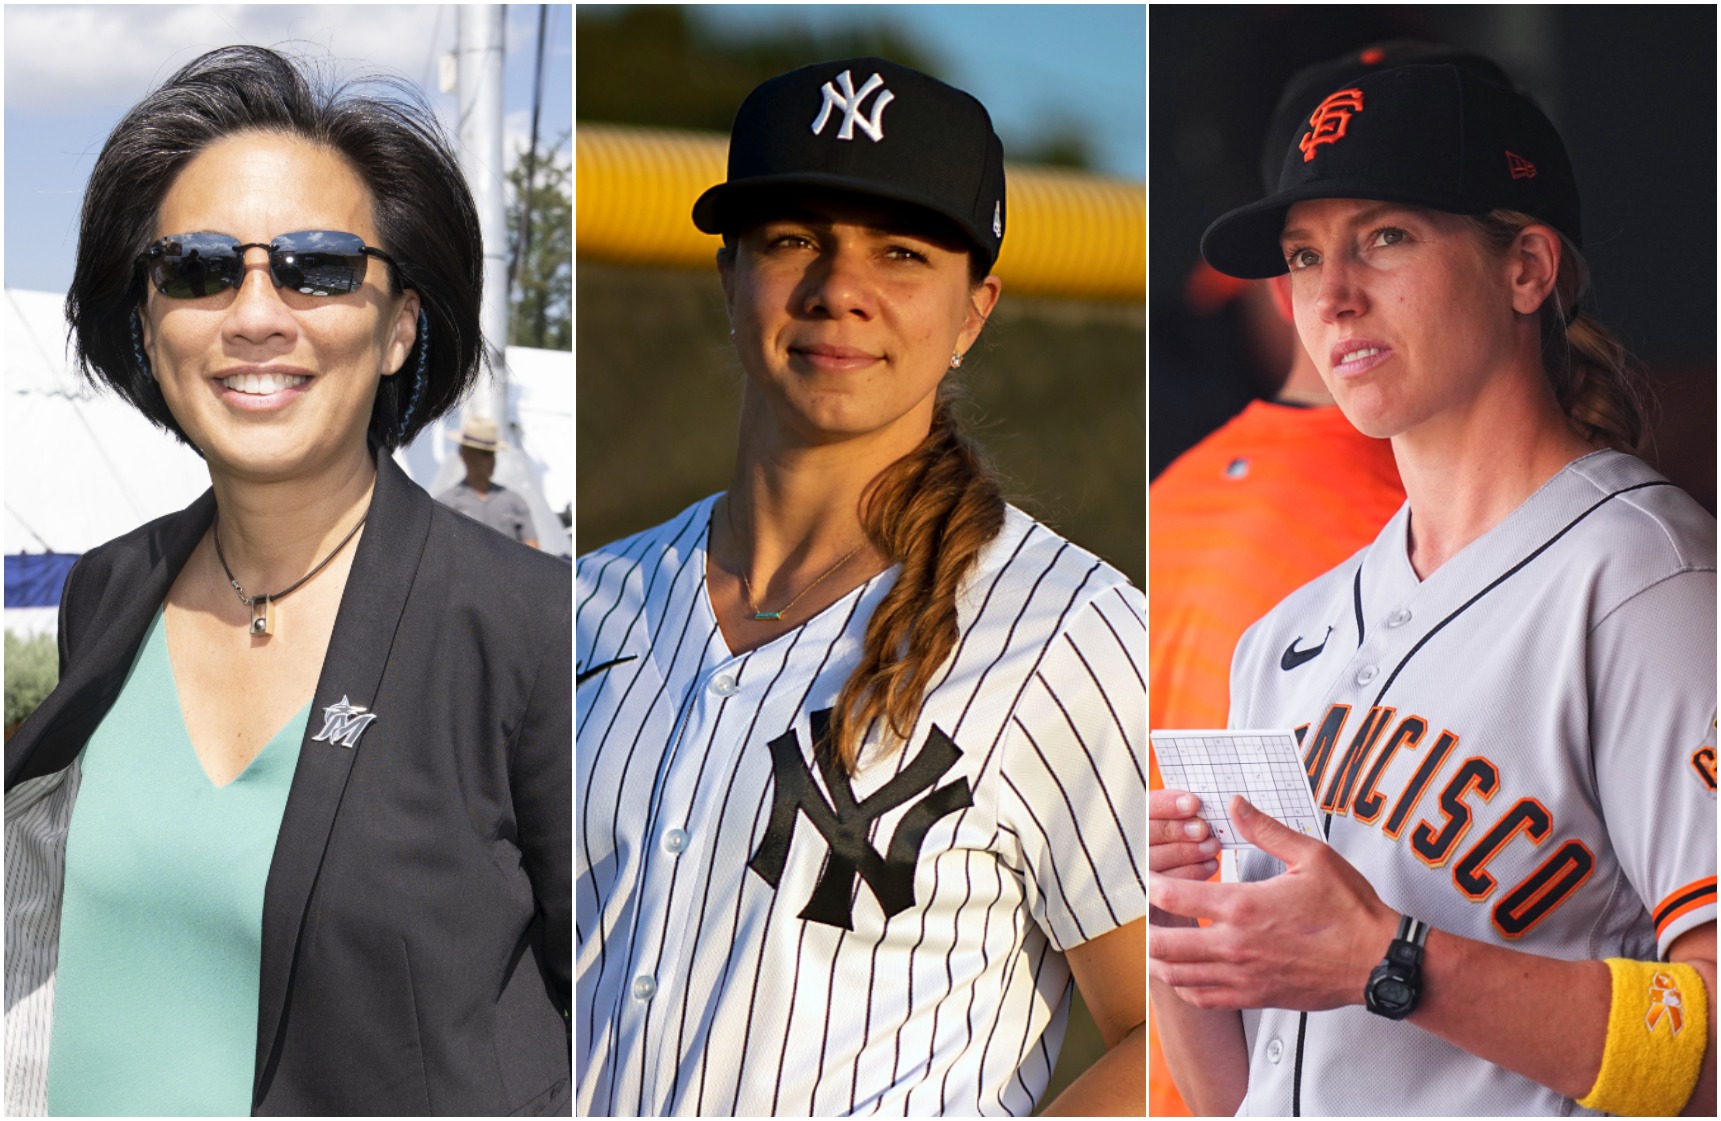 New York Yankees coach Rachel Balkovec is latest woman to make baseball  history - Sports Illustrated NY Yankees News, Analysis and More